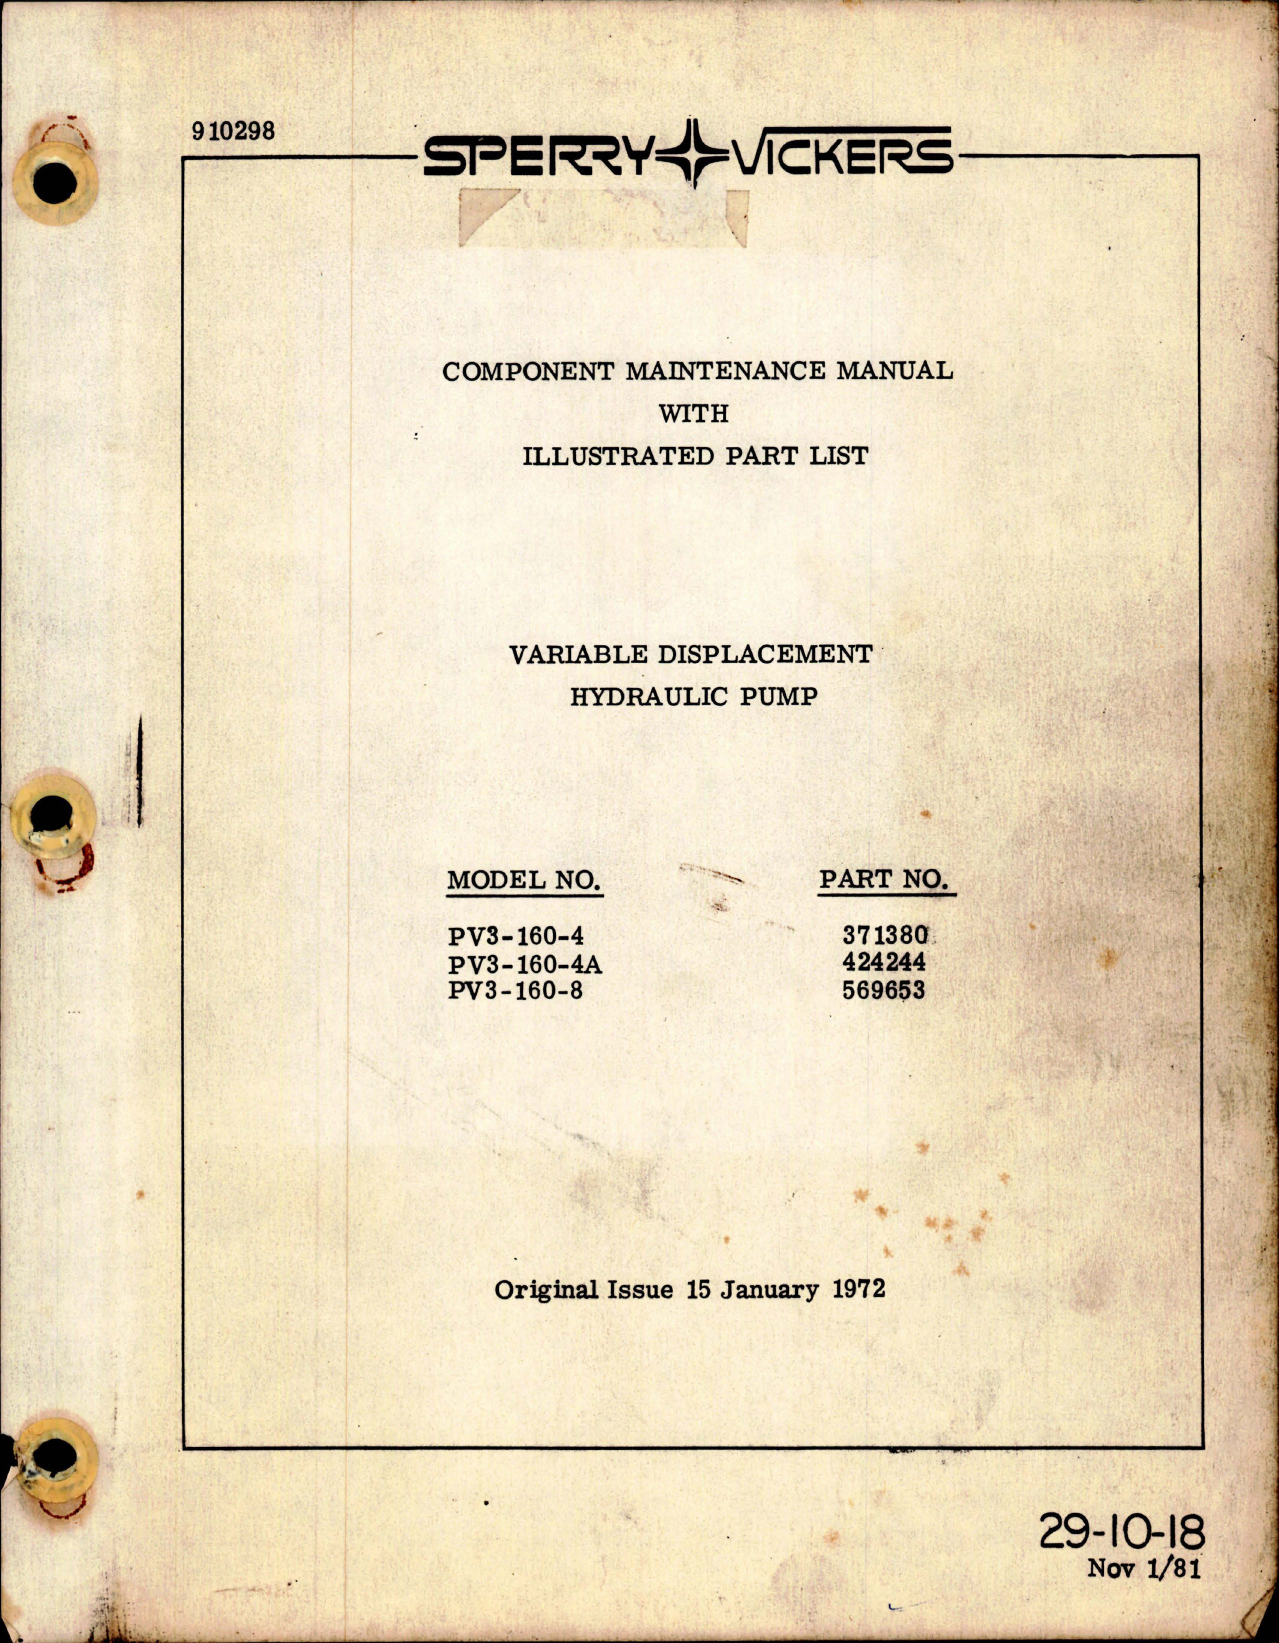 Sample page 1 from AirCorps Library document: Maintenance Manual with Illustrated Parts List for Variable Displacement Hydraulic Pump 